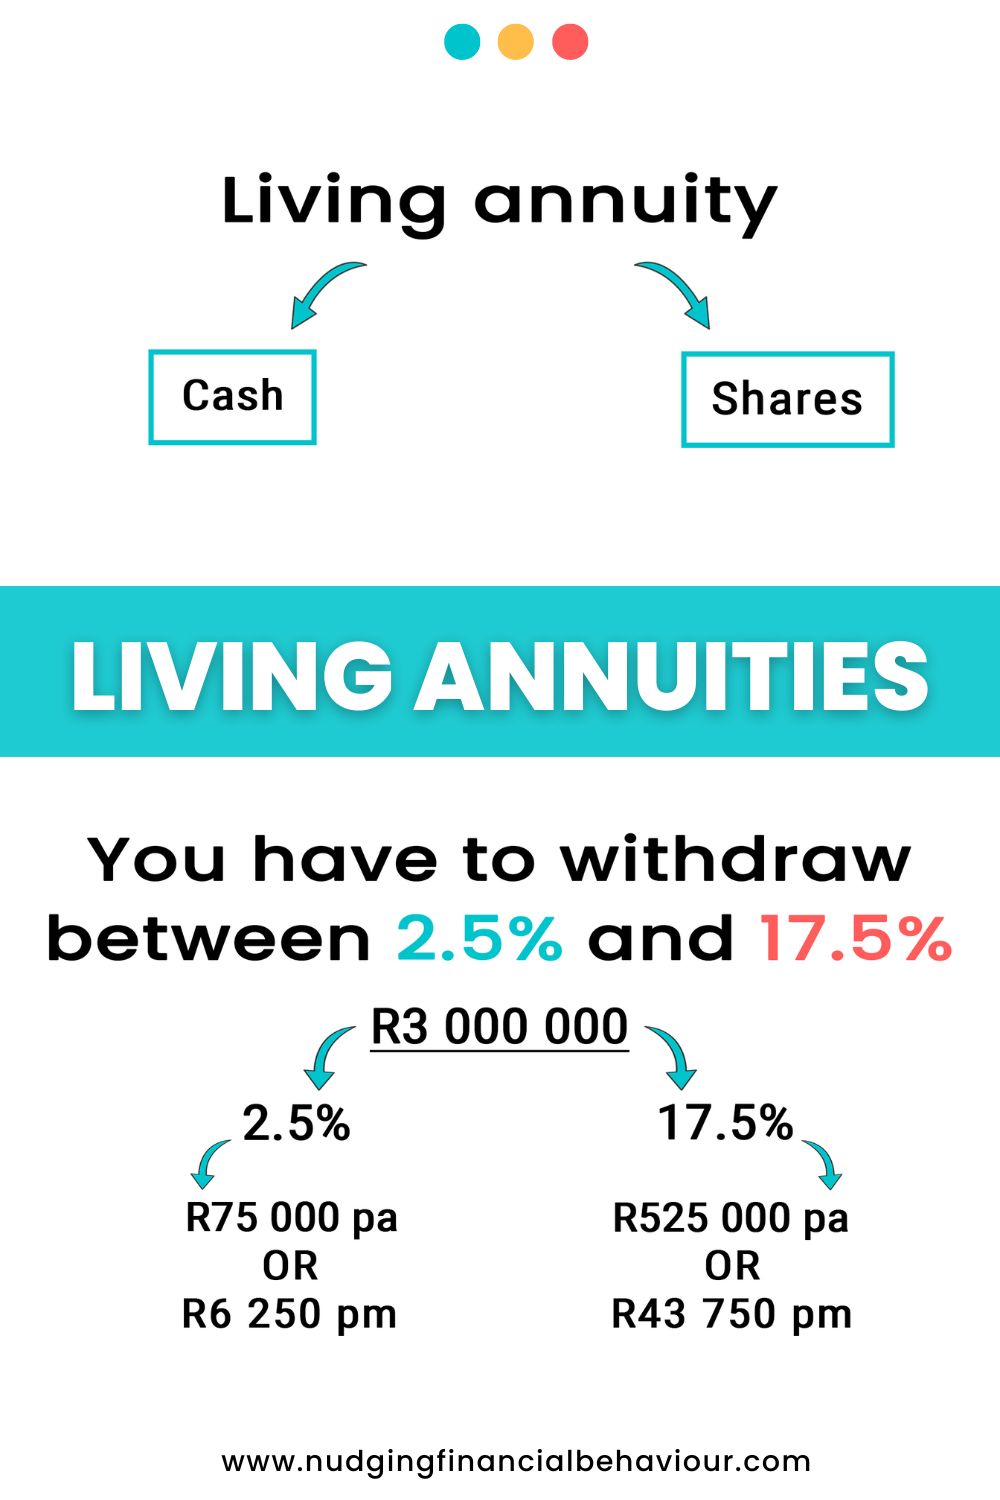 What is a living annuity